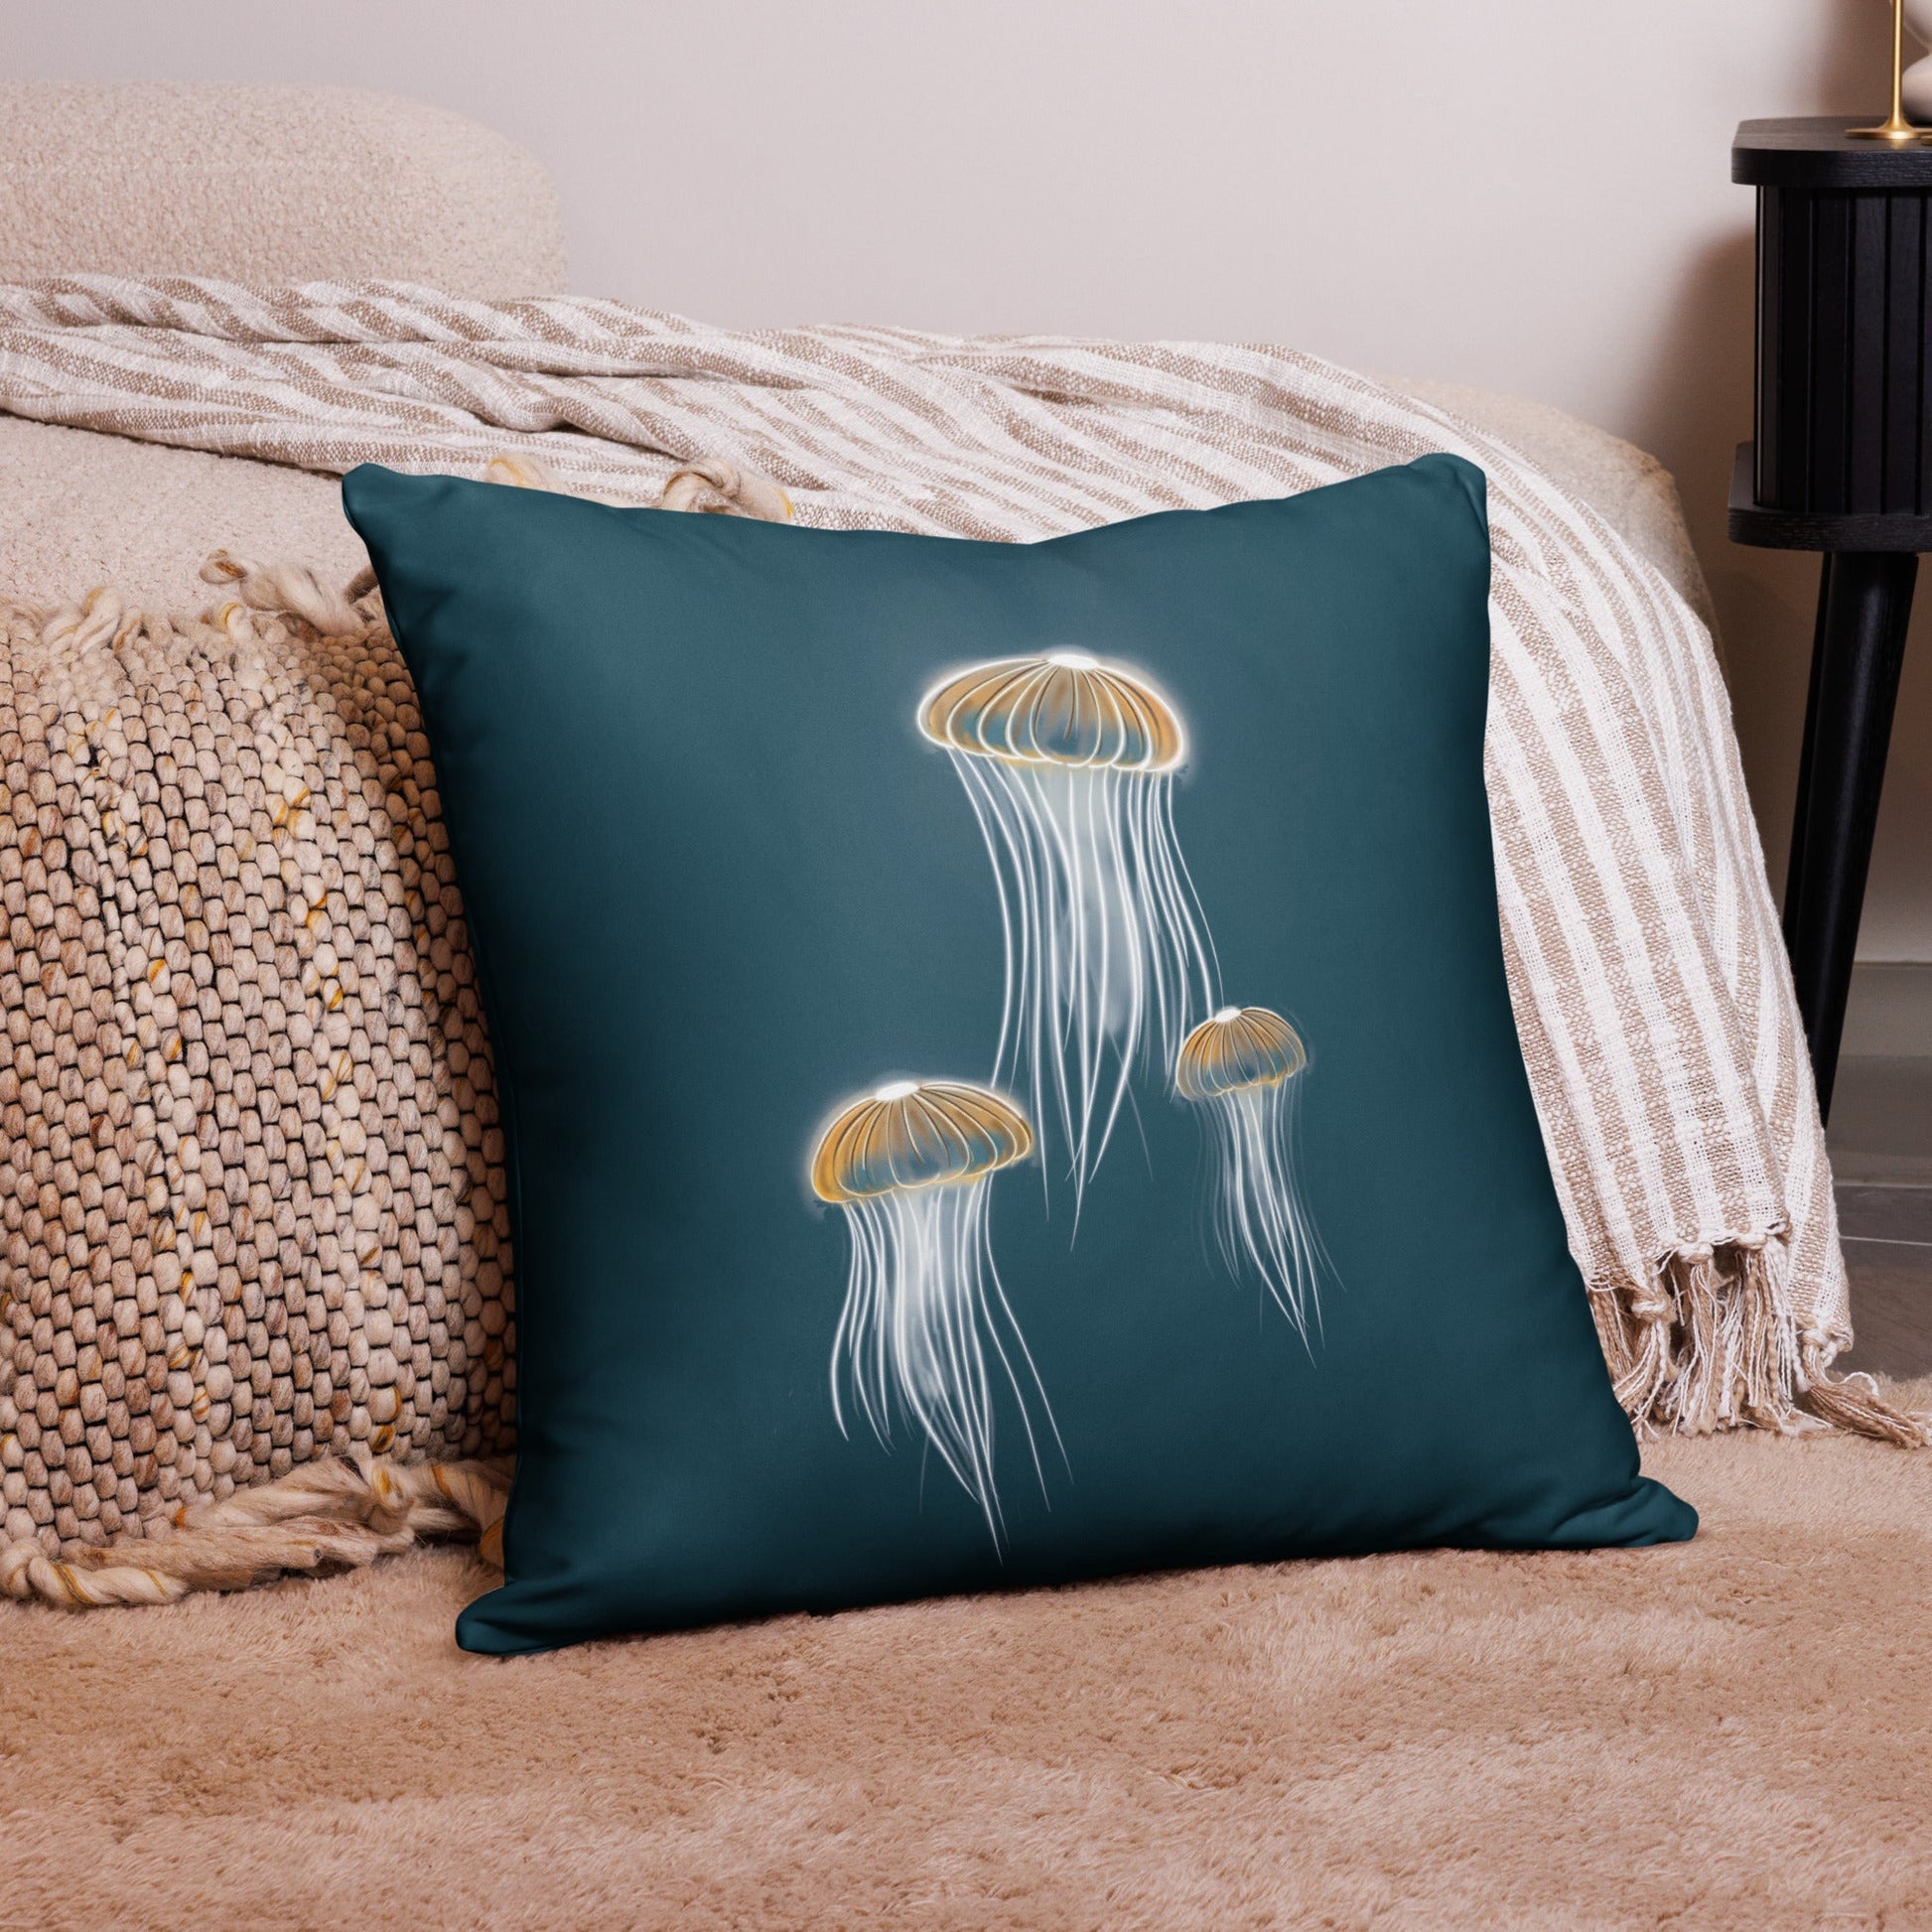 CUSHION - Gelly Fishes - 2 sizes available - Christel Mesey Art